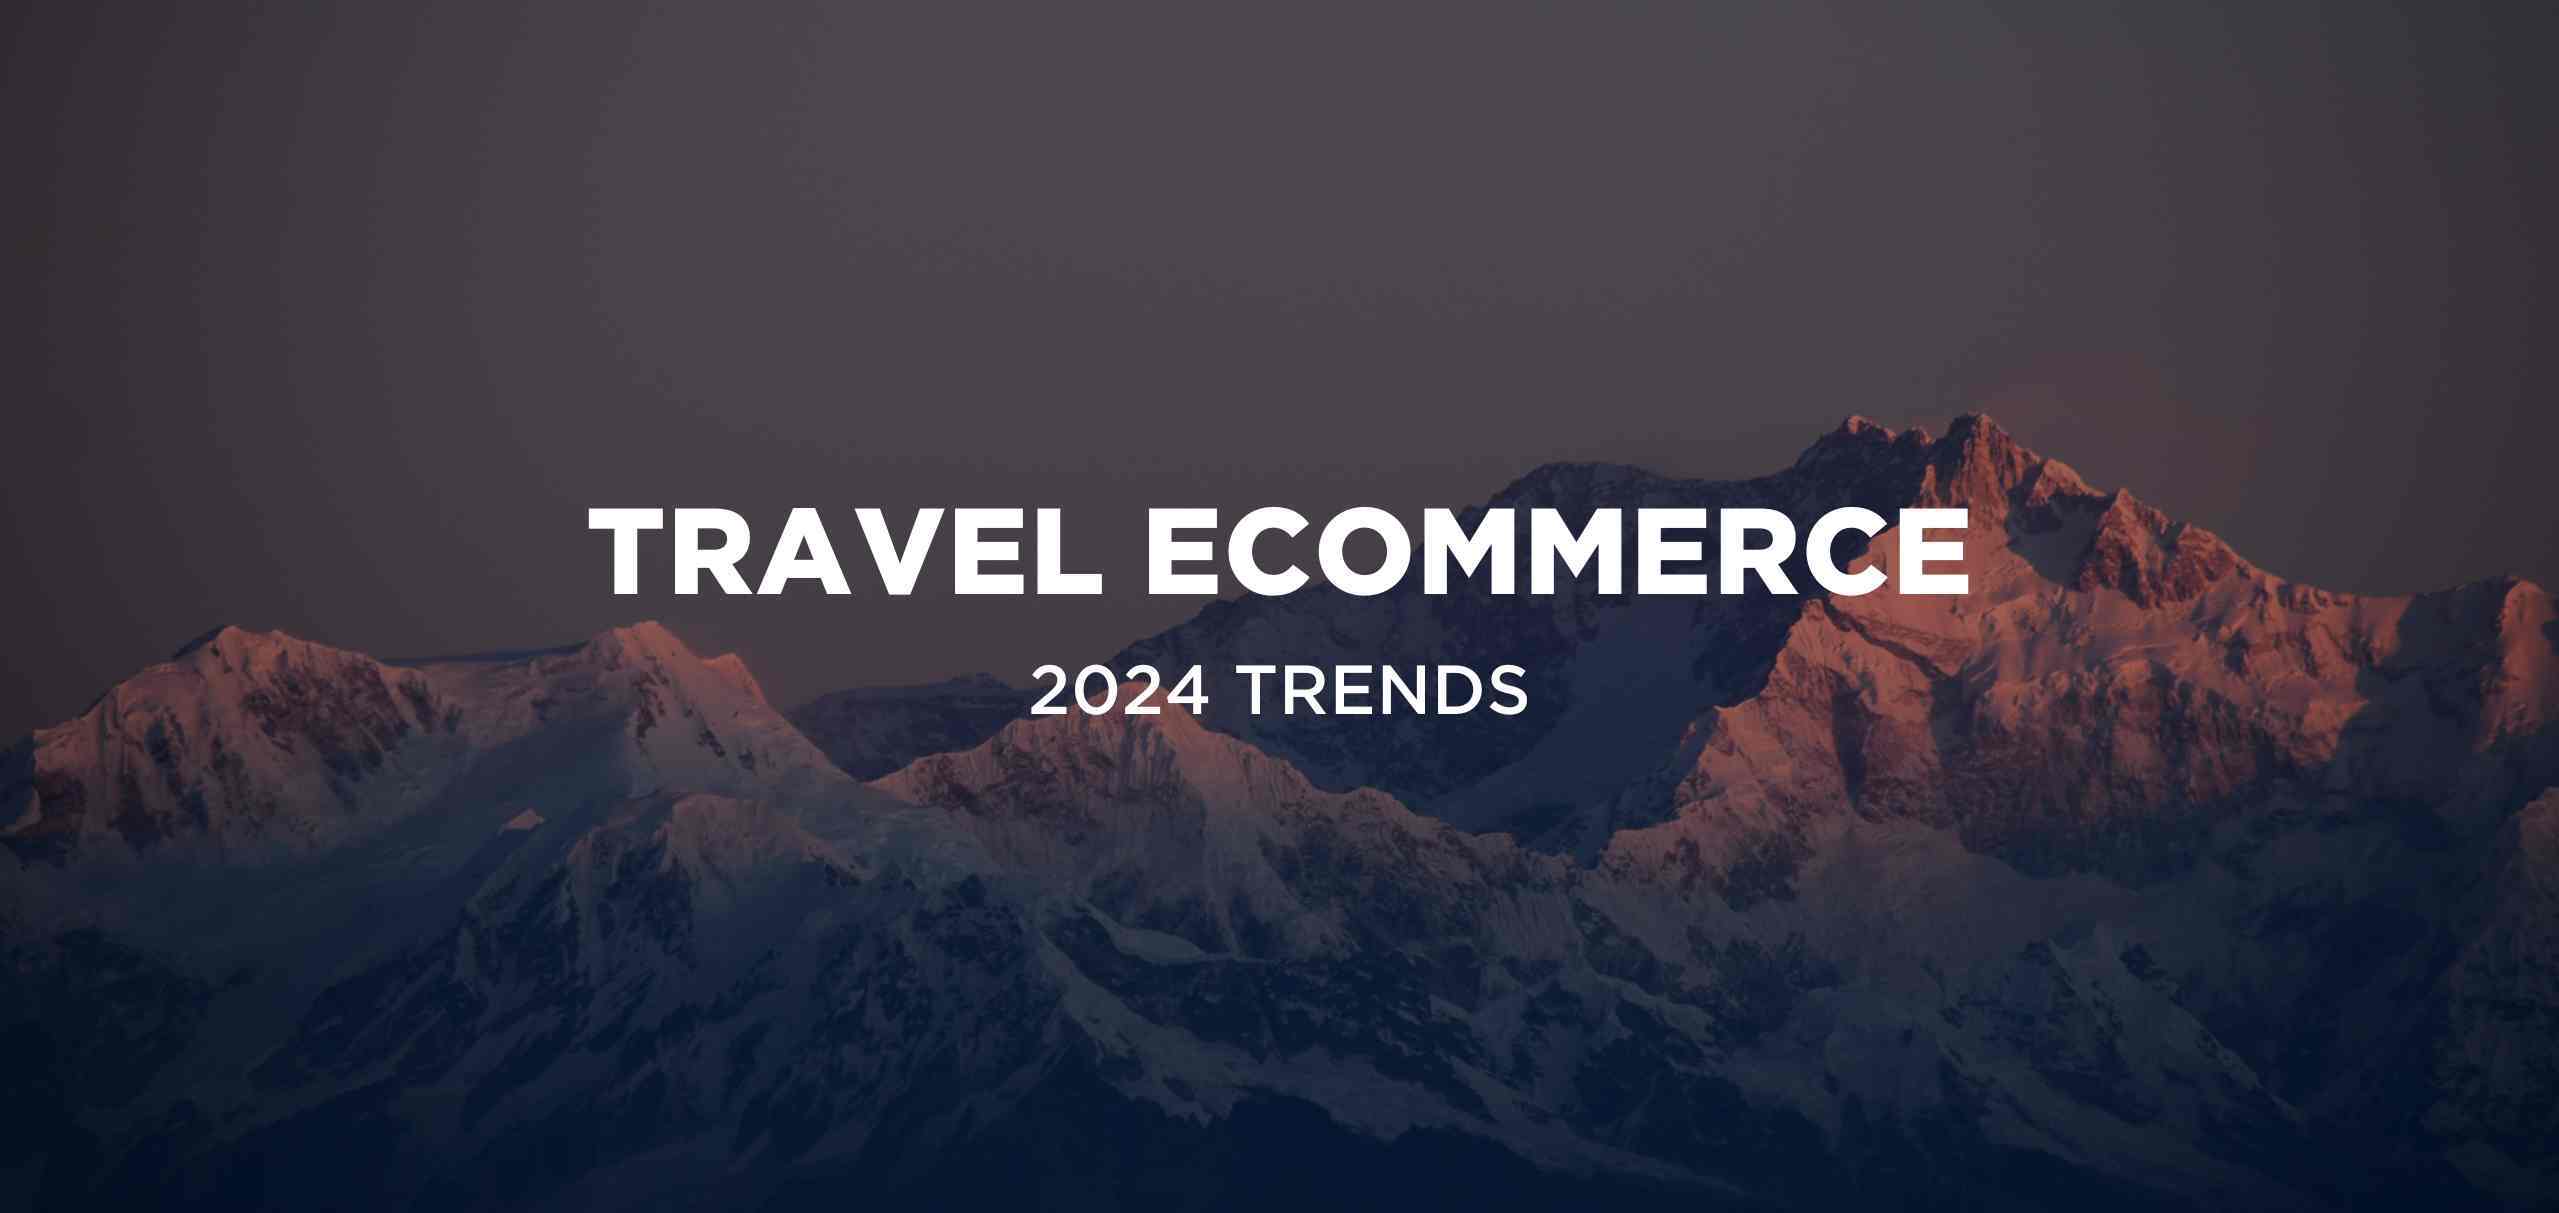 Travel Ecommerce Trends in 2024